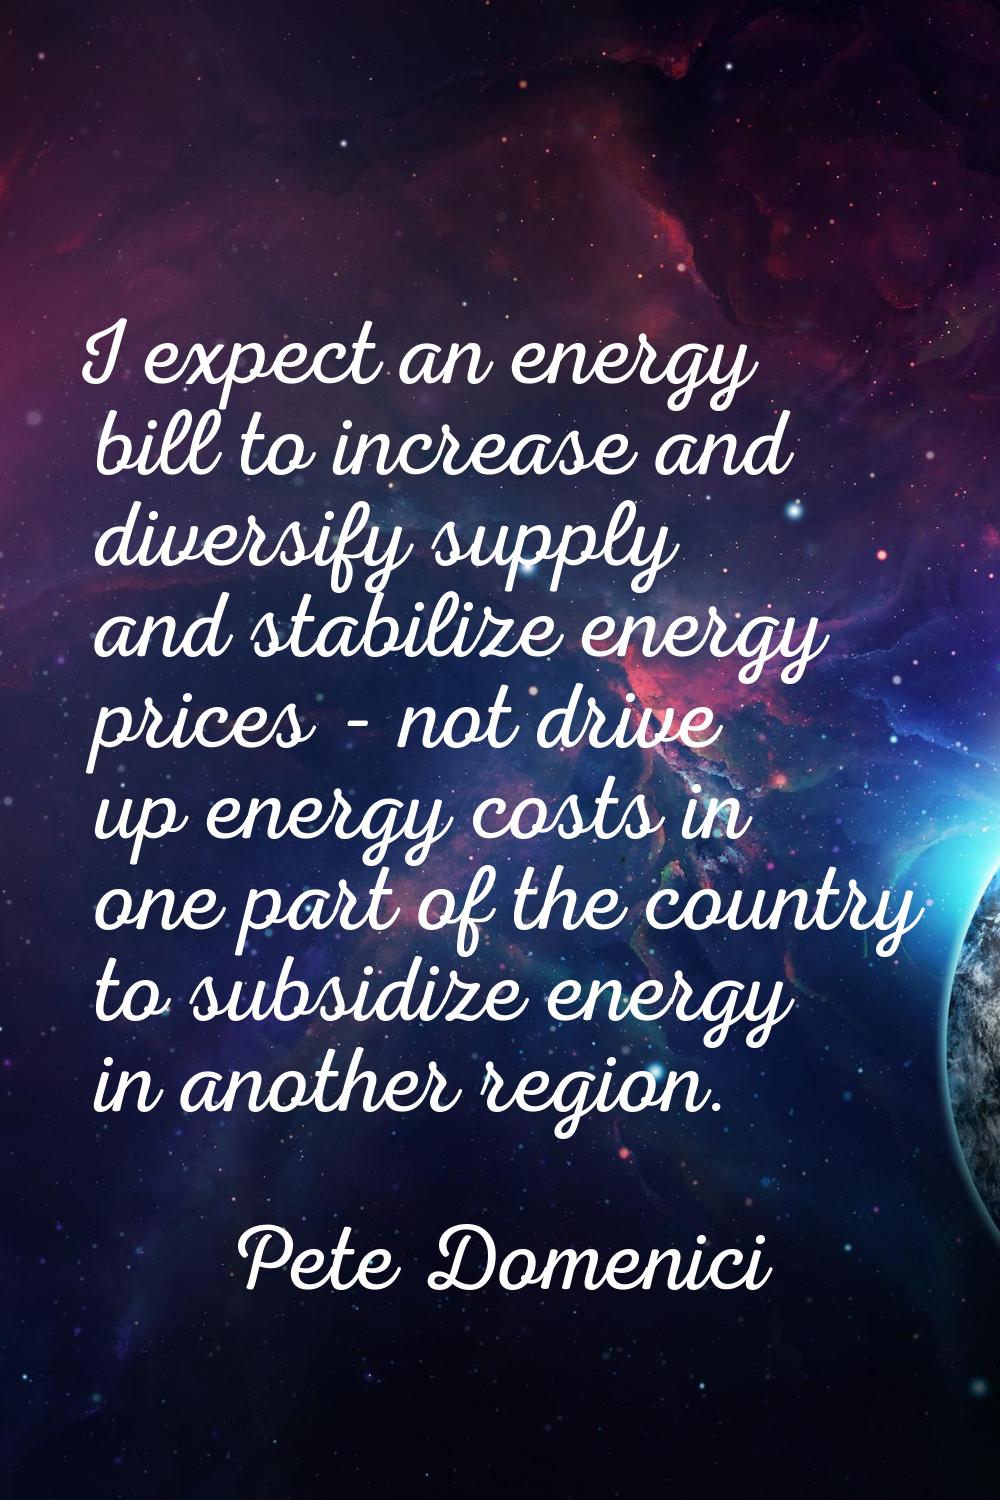 I expect an energy bill to increase and diversify supply and stabilize energy prices - not drive up